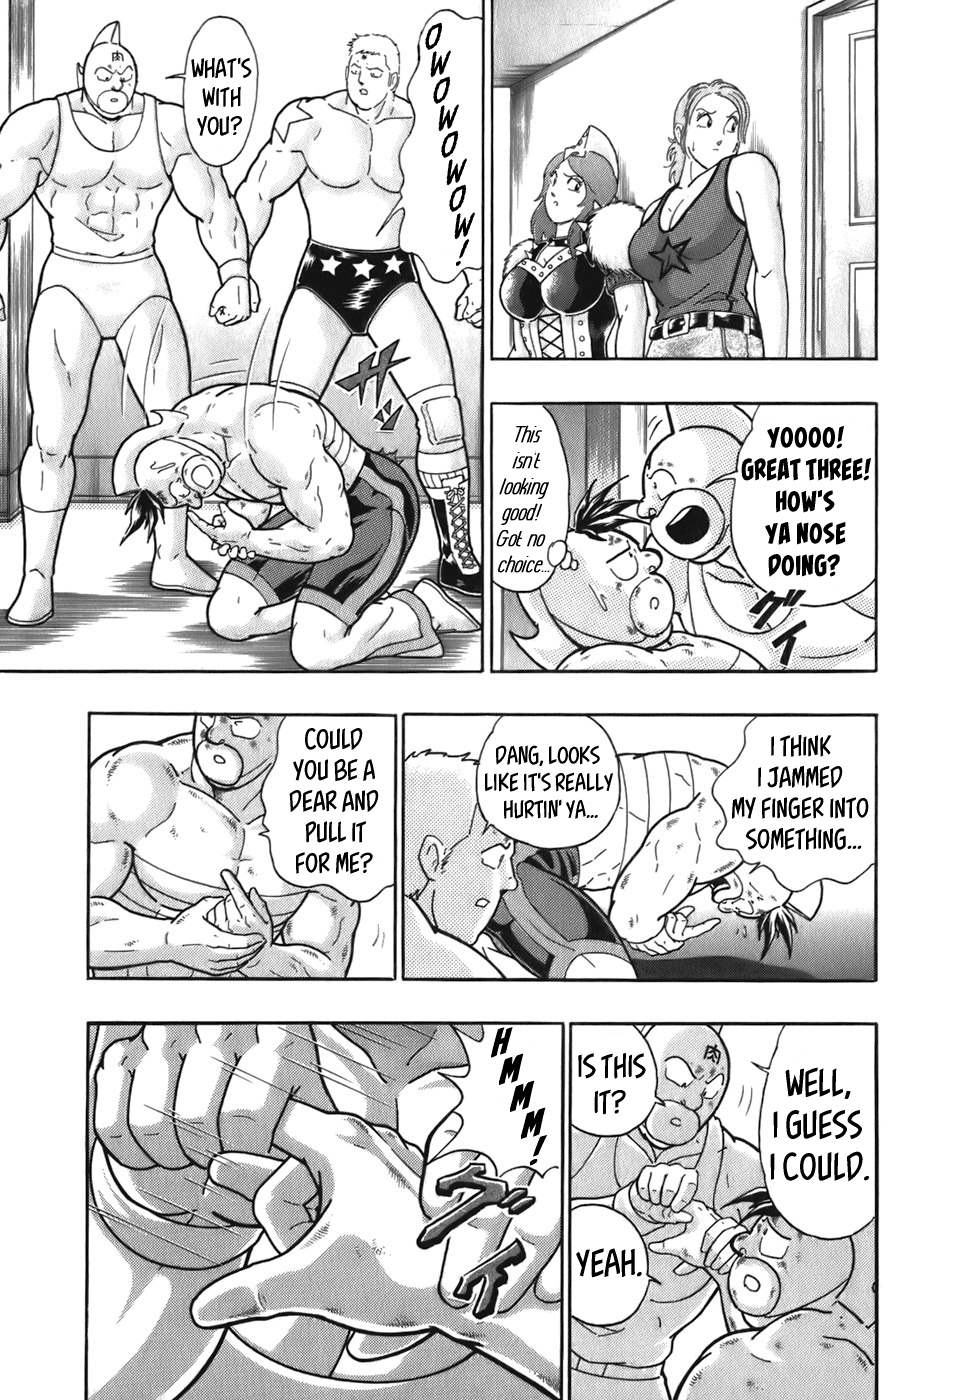 Kinnikuman Nisei: Ultimate Chojin Tag Vol. 5 Ch. 49 Another Search For The "Savior Of The Rest"!?